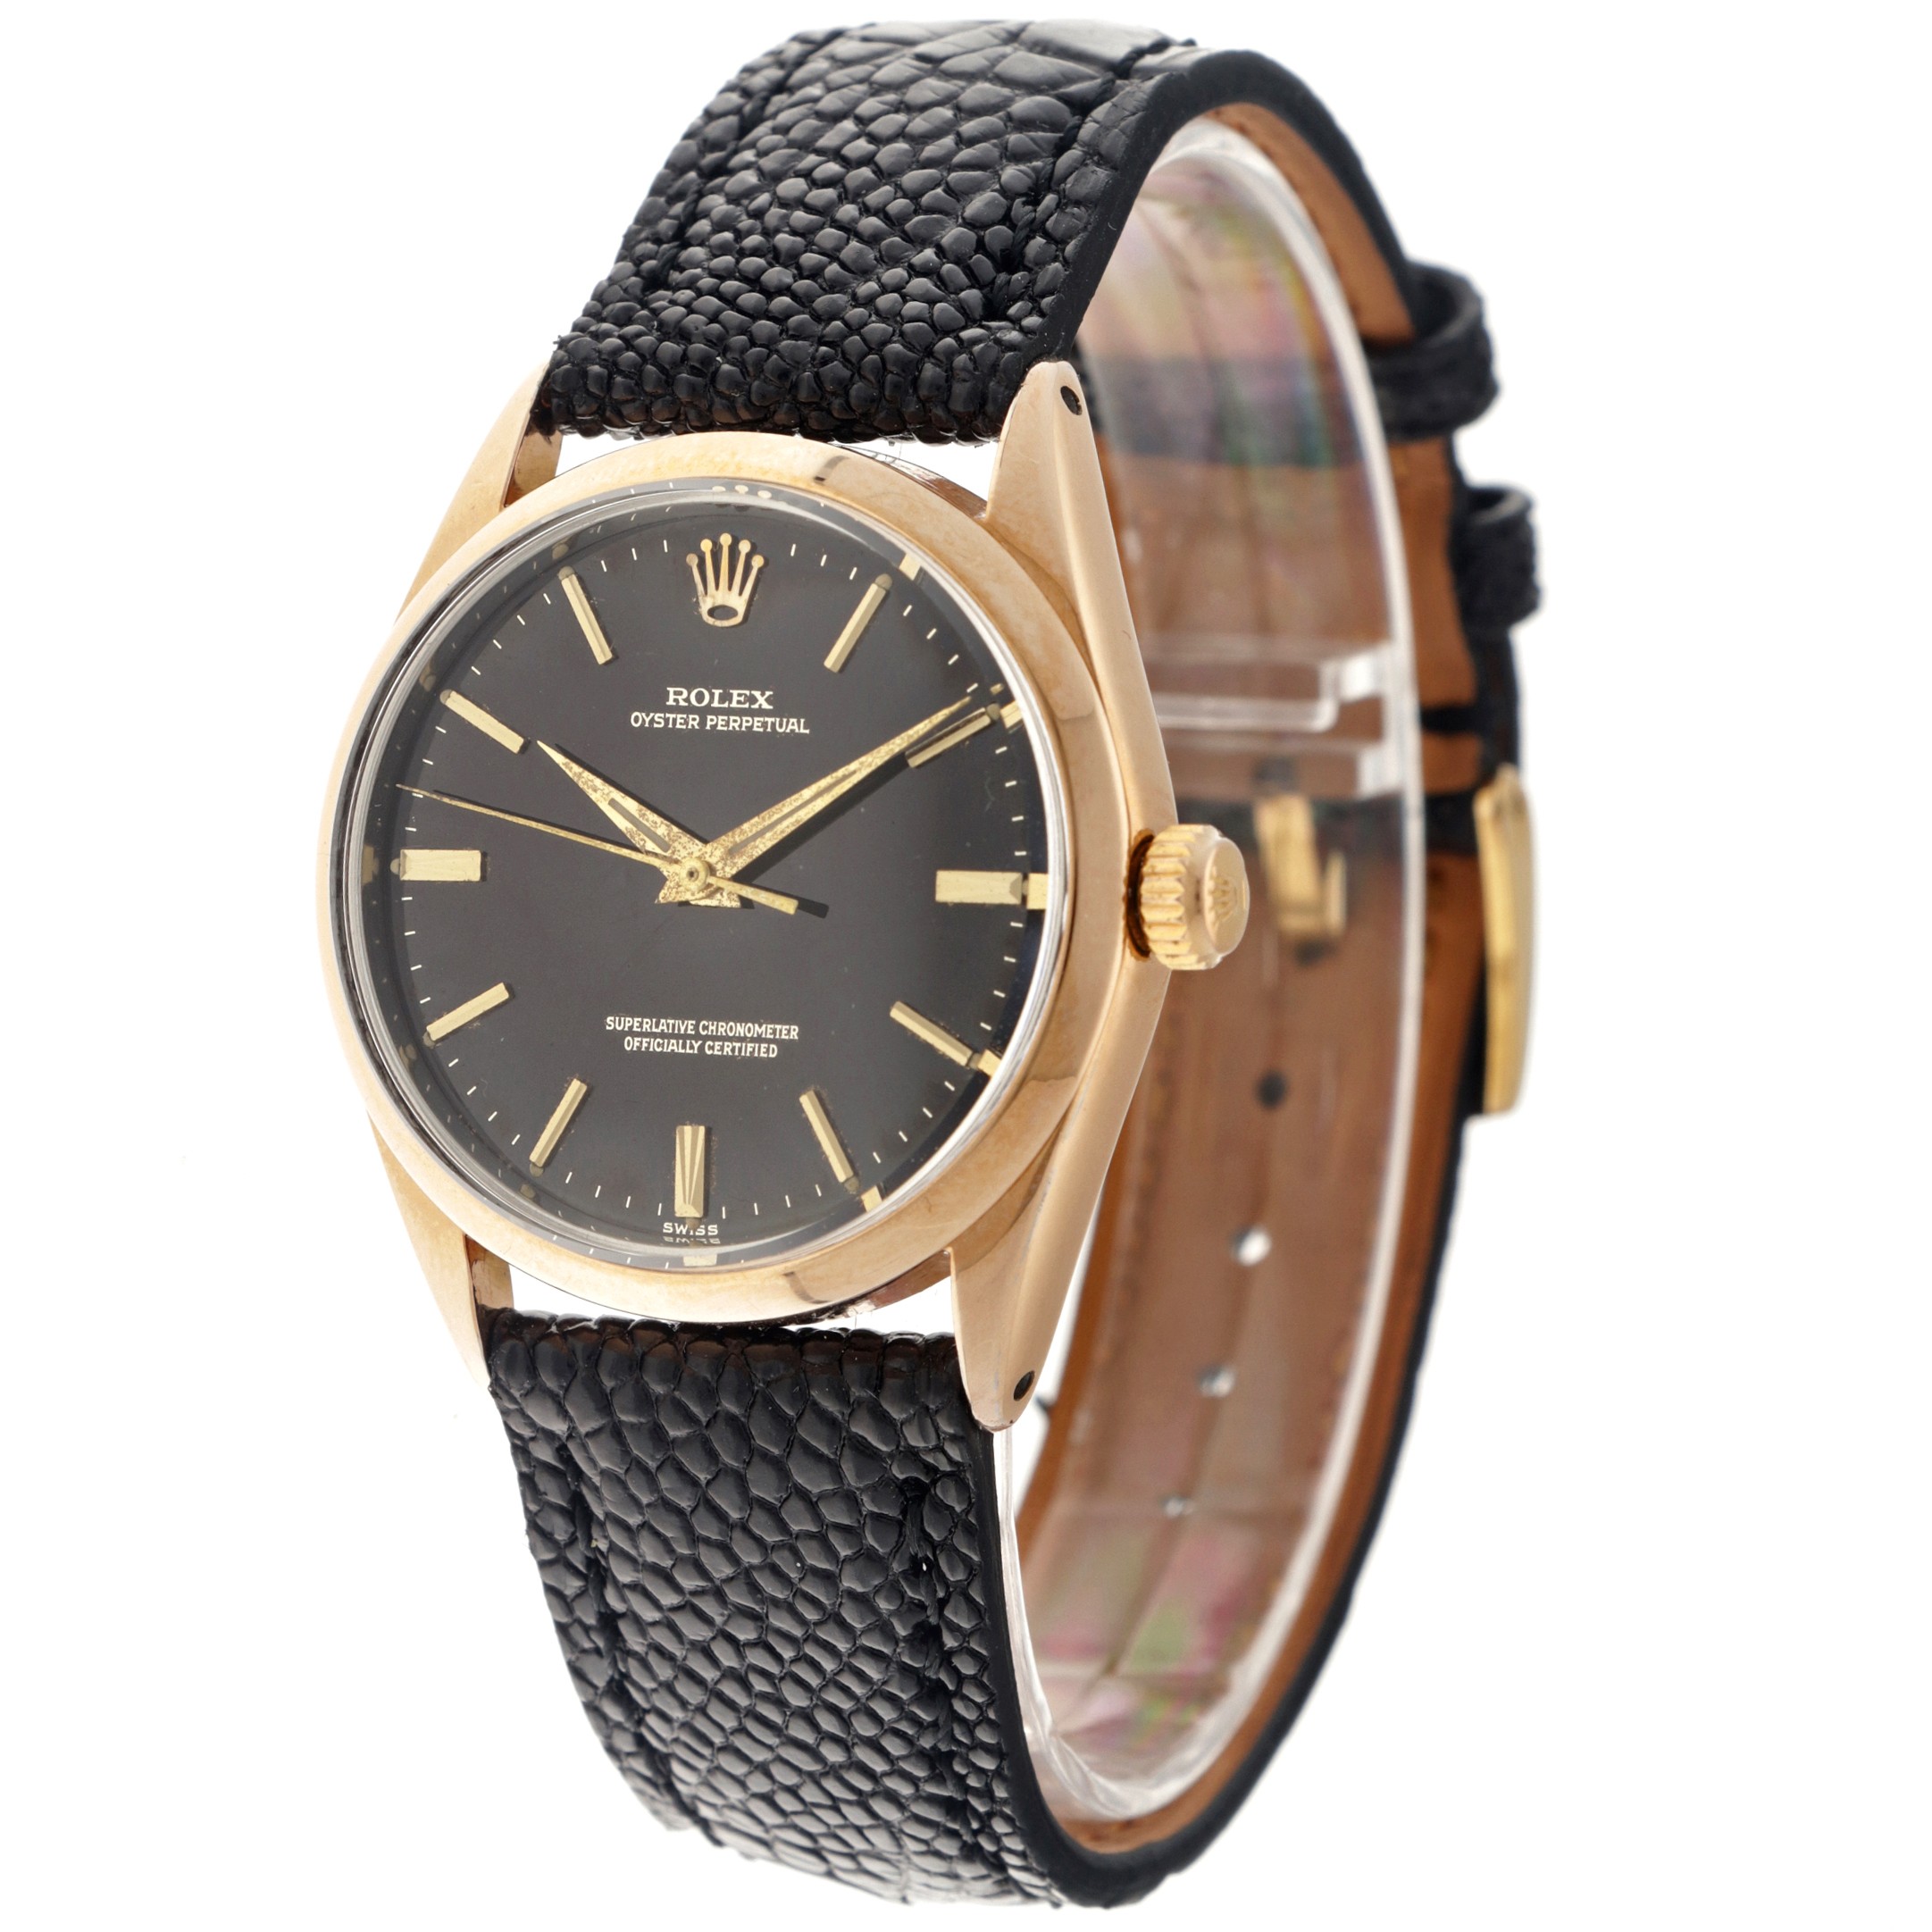 No Reserve - Rolex Oyster Perpetual 1024 - Men's watch - approx. 1961. - Image 2 of 5